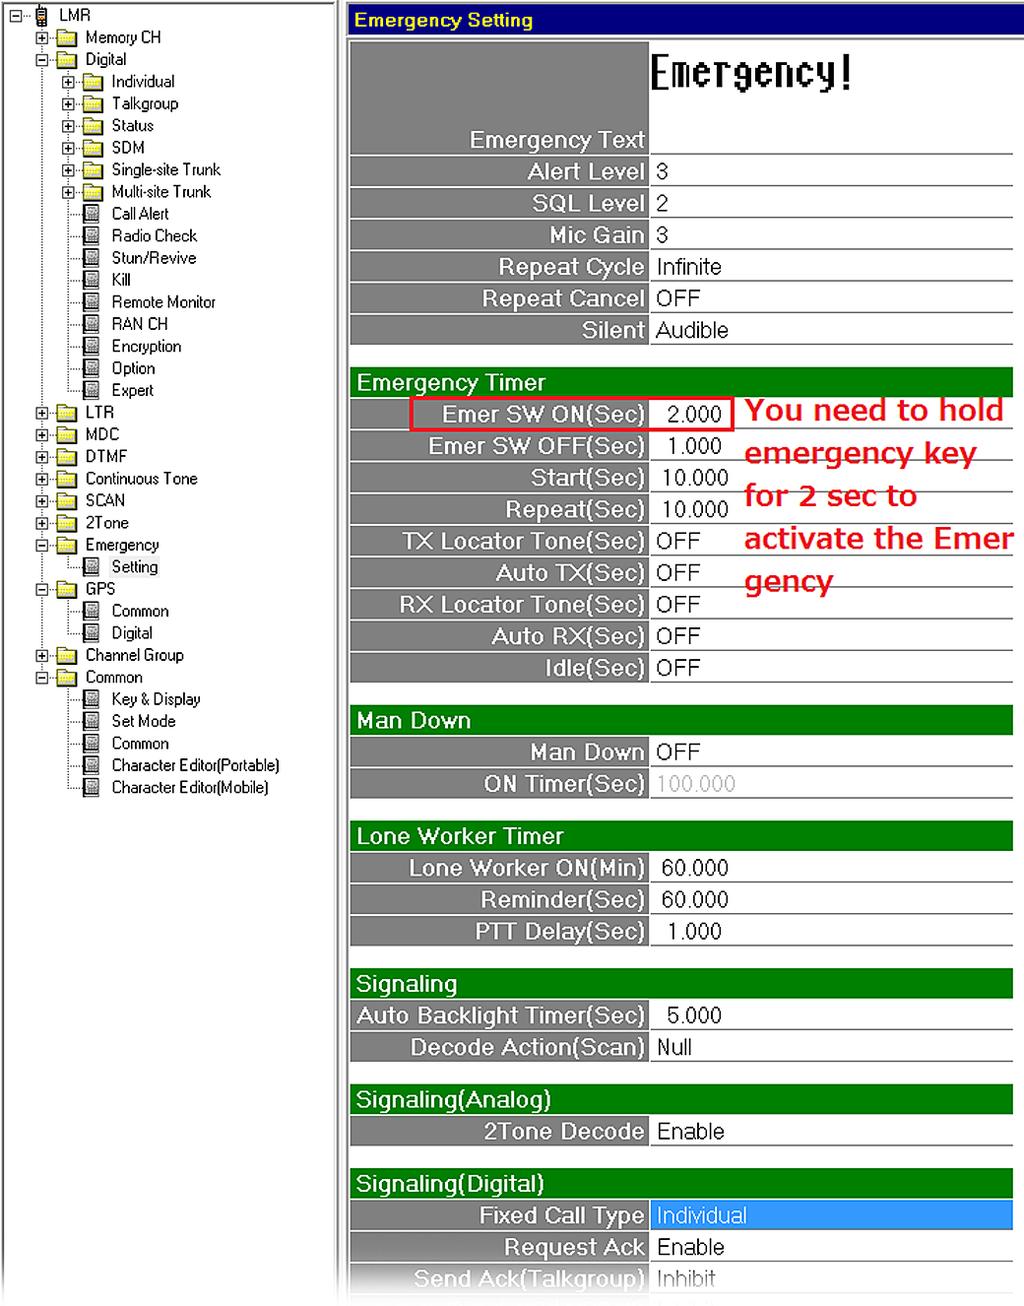 Select Emergency to display the Emergency Setting configuration page similar to the one shown in Figure 10.